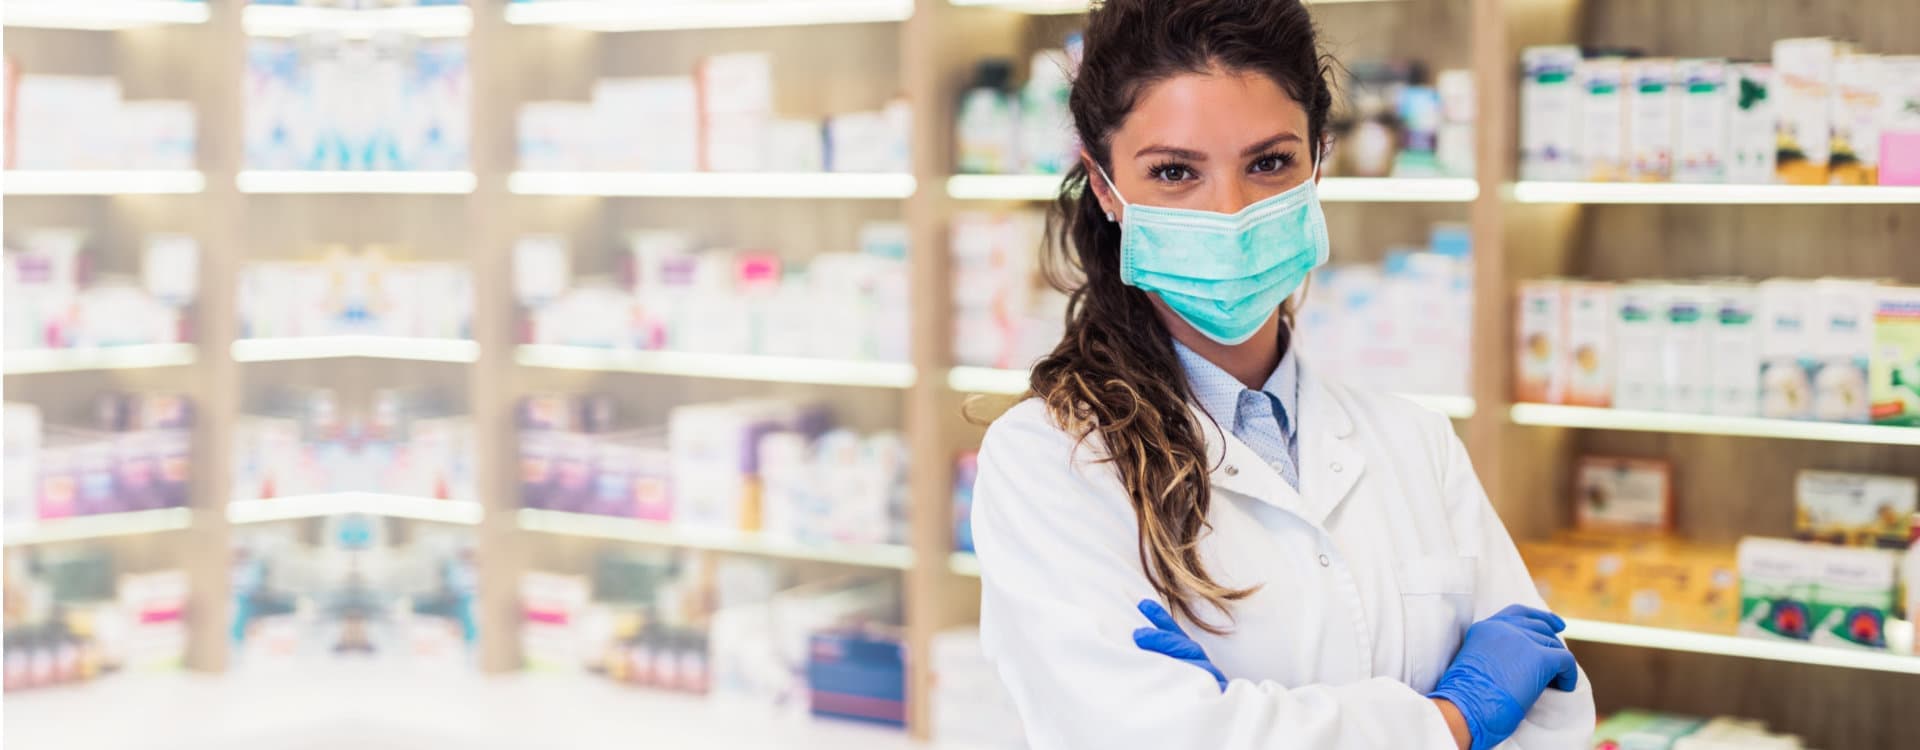 smiling pharmacist wearing a mask